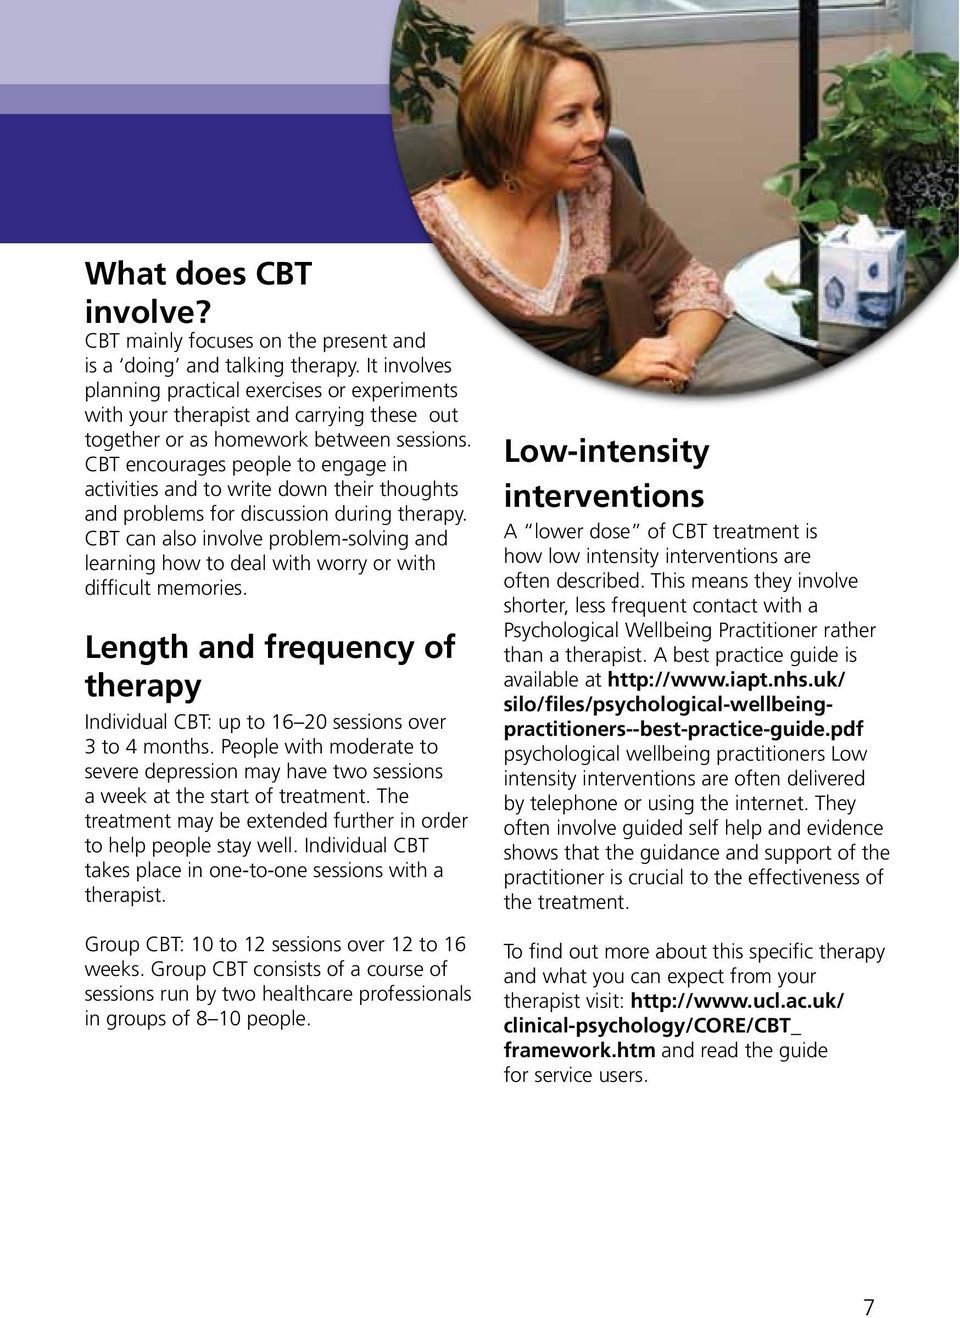 CBT encourages people to engage in activities and to write down their thoughts and problems for discussion during therapy.